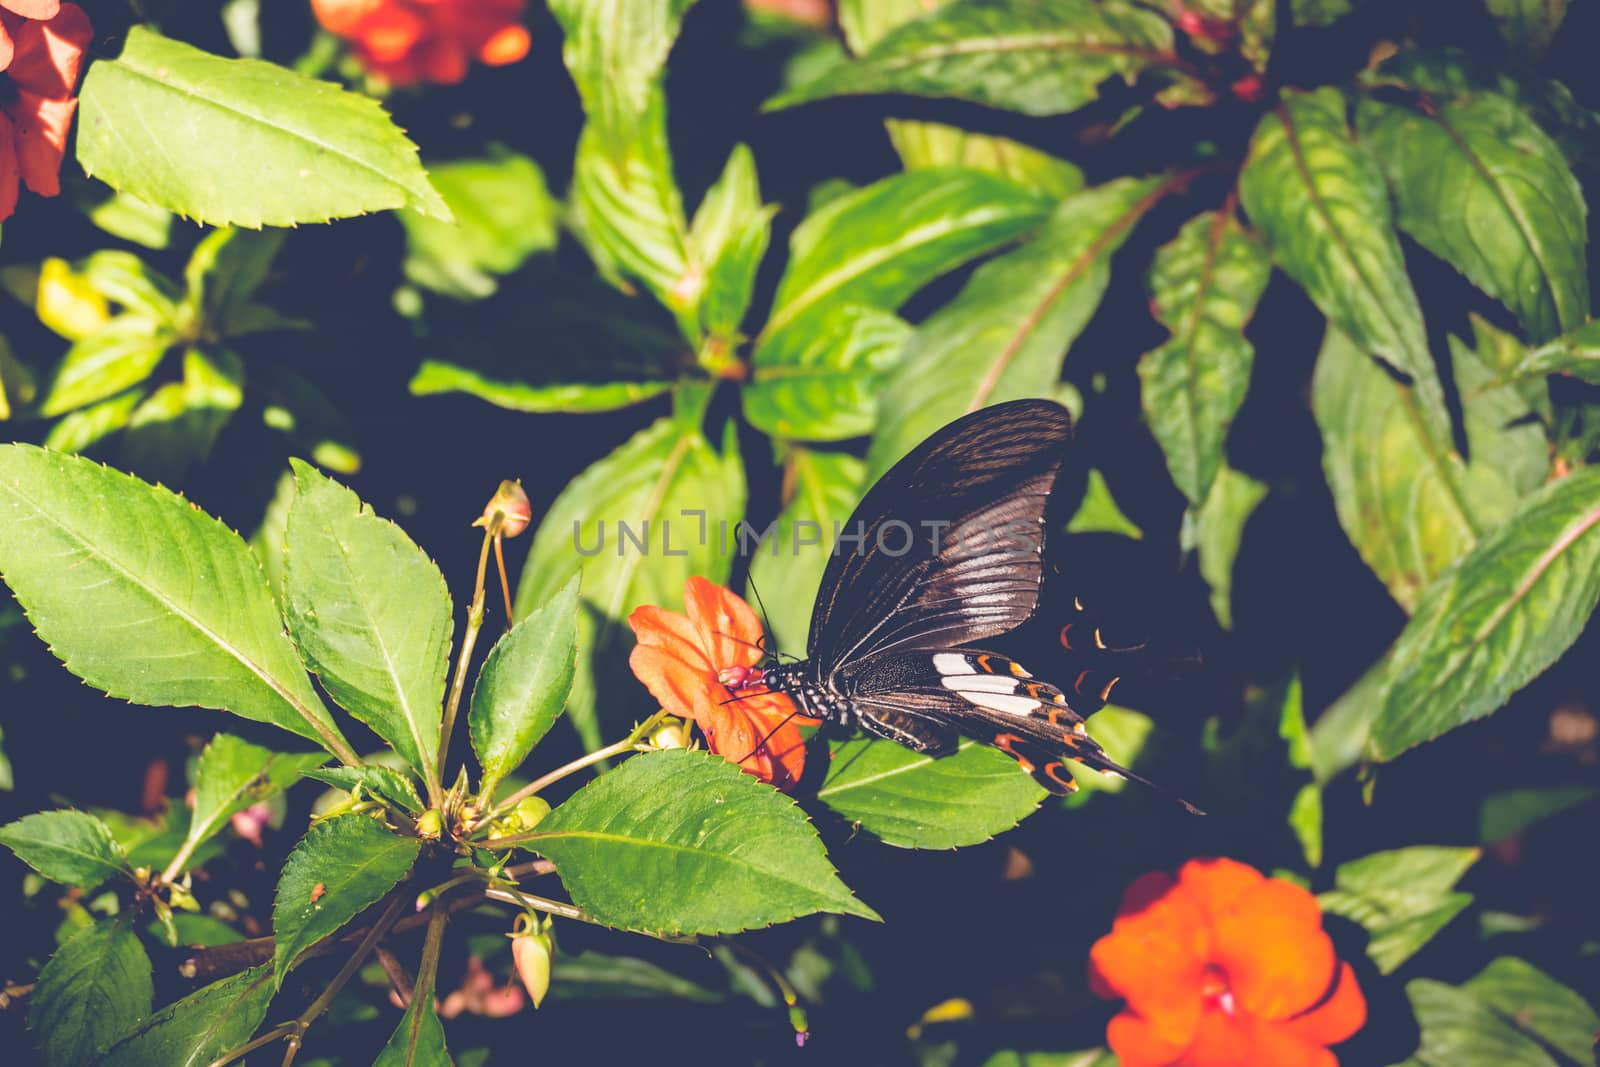 Butterfly sucking nectar of flowers, nature background